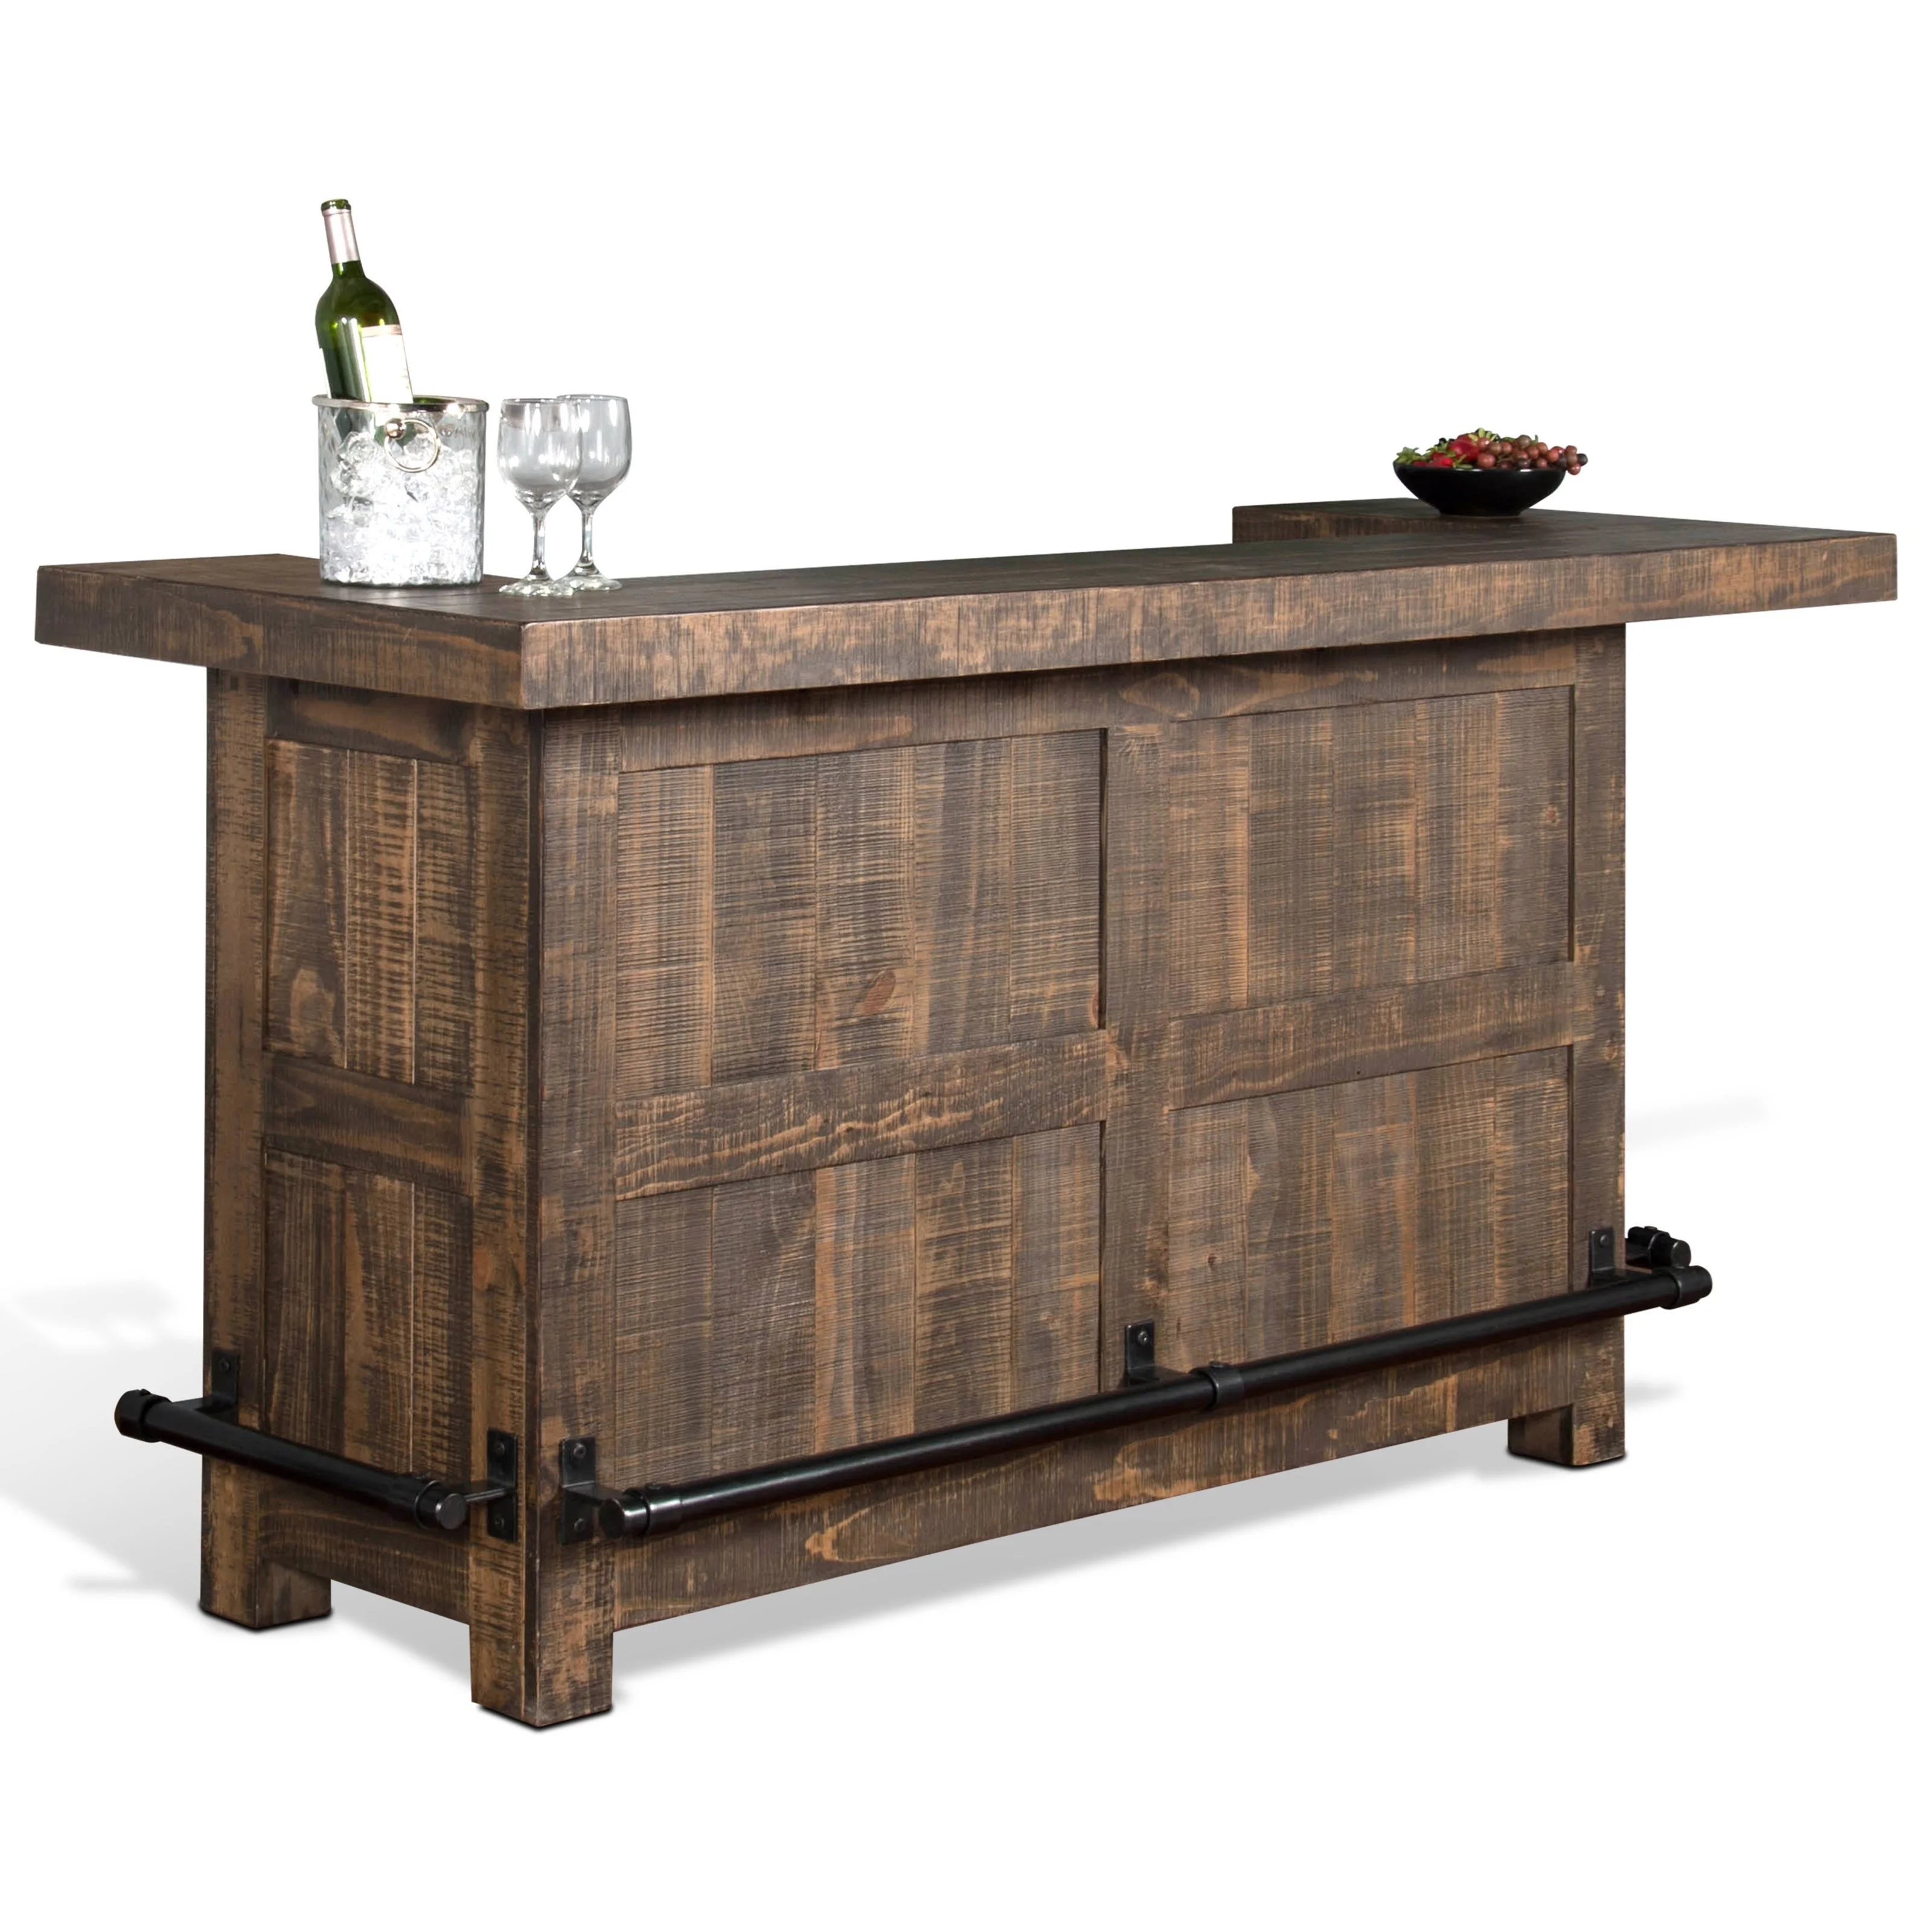 Sunny Designs Homestead Rustic Bar with Wine Glass Storage | Darvin ...